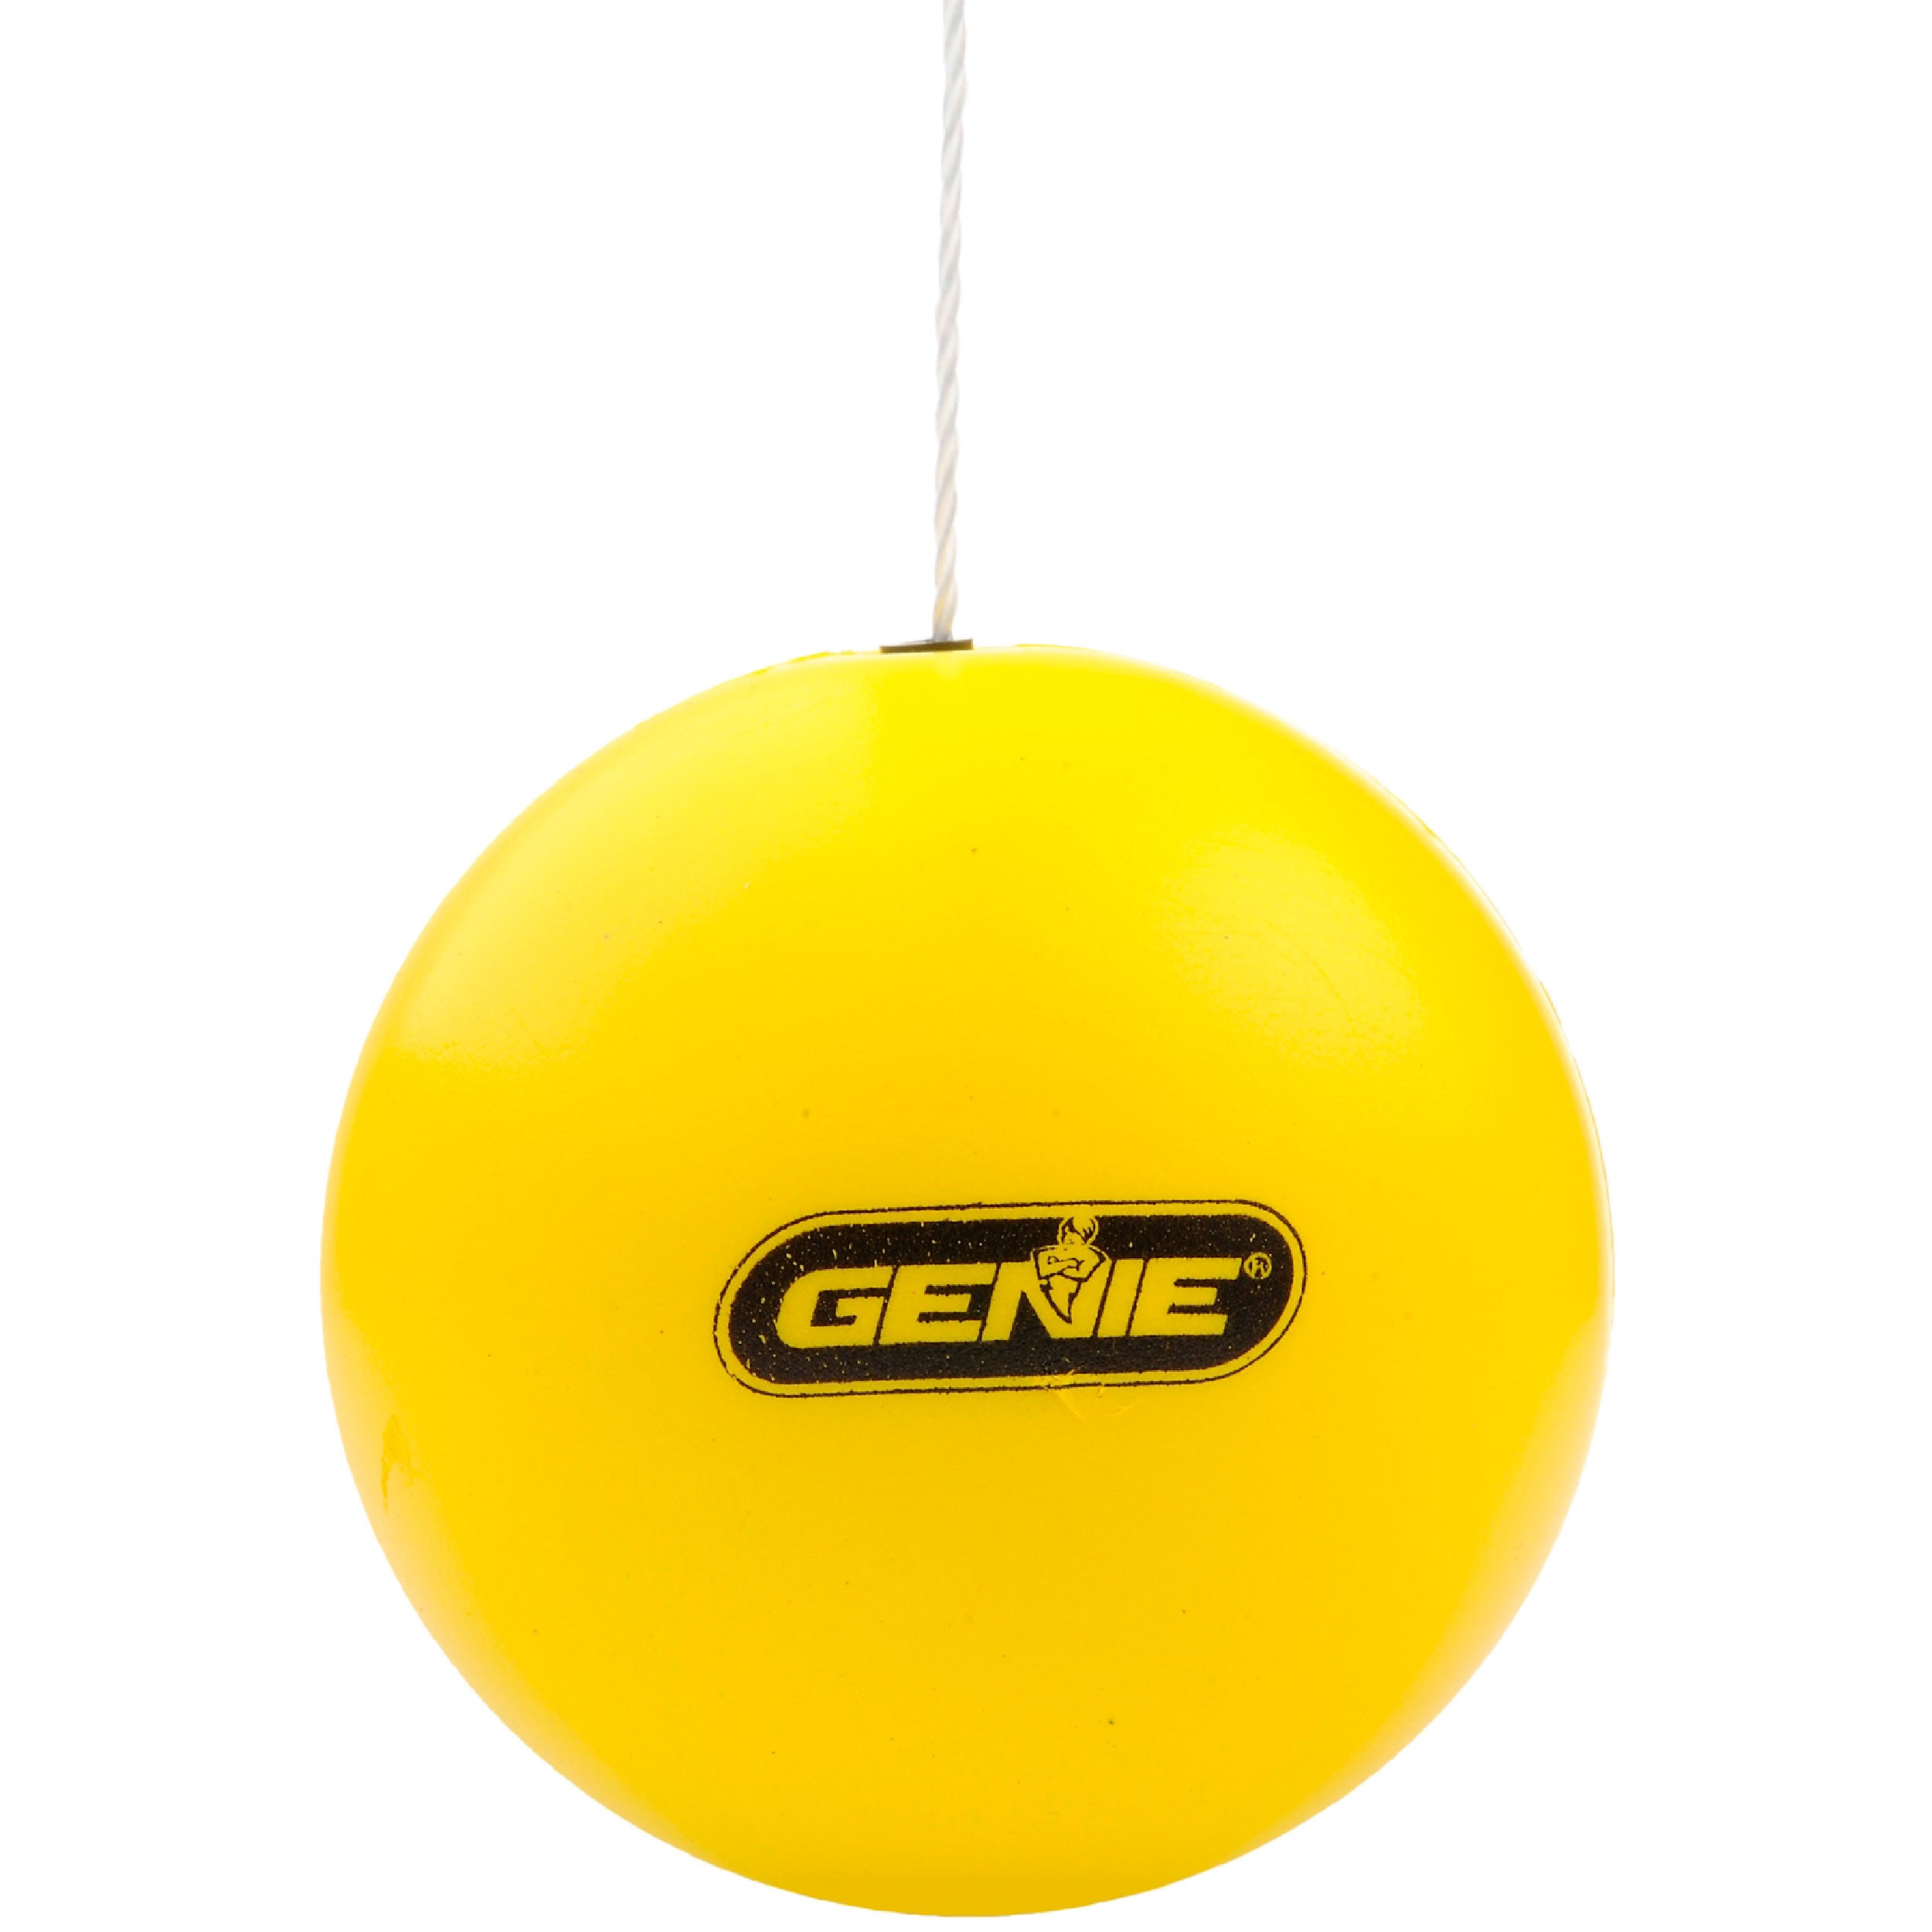 Garage Parking Assist - Lets Innovate Life Parking ball parking aid